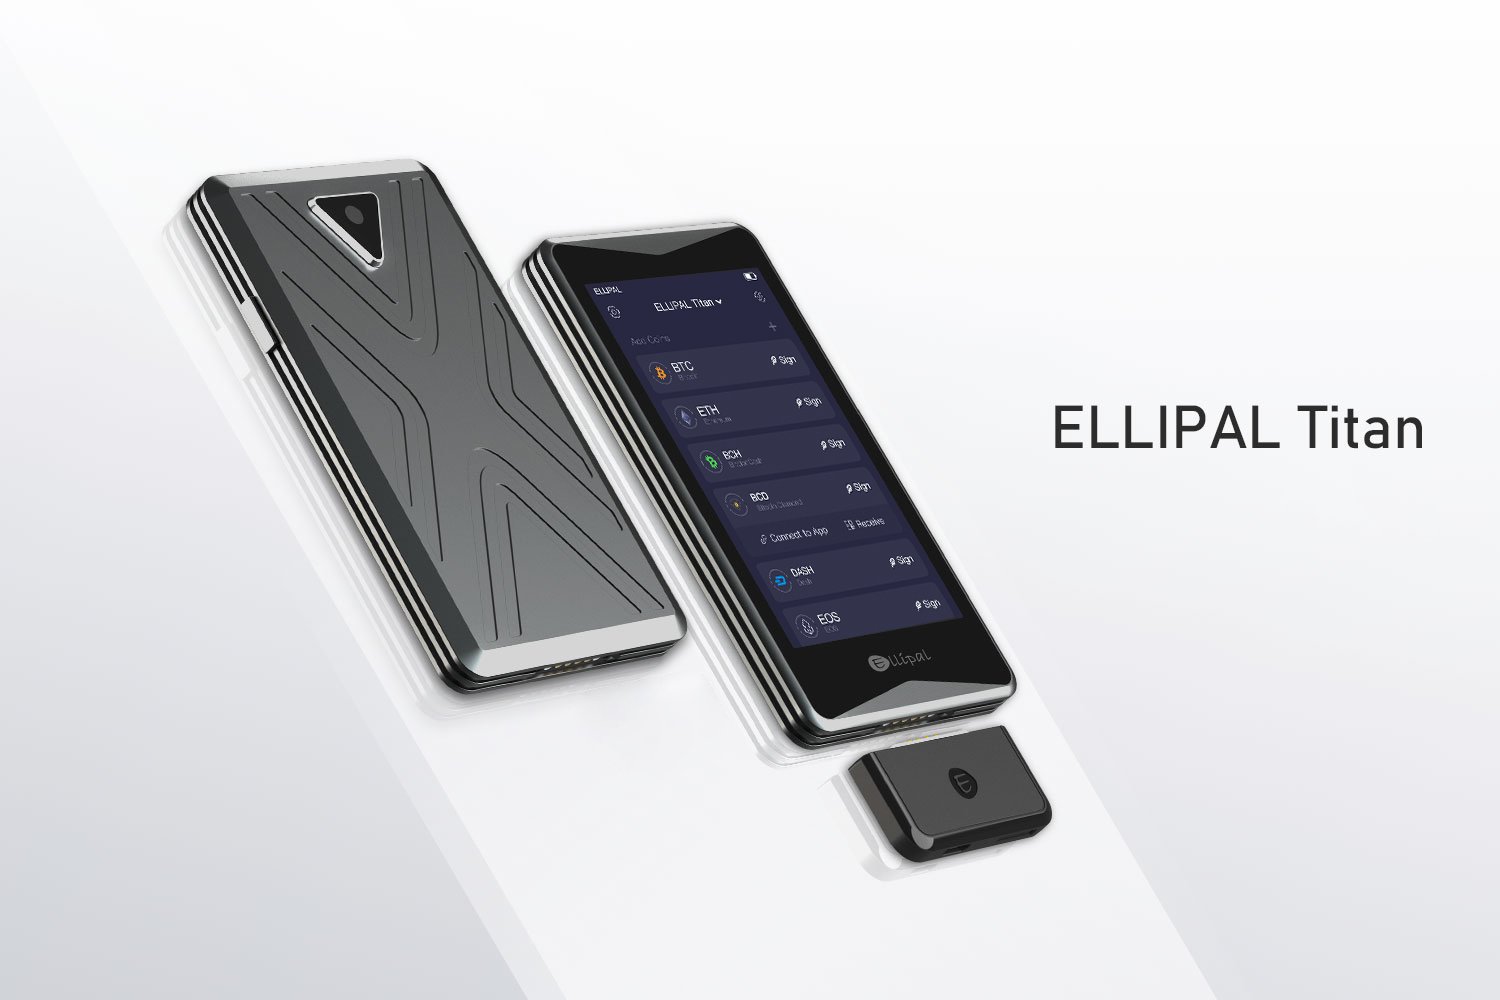 ELLIPAL Titan cold wallet, the best crypto hardware wallet. ELLIPAL supports 41 blockchains and over 10,000 tokens, secure your Bitcoin, Ethereum and more crypto assets with the most secure air-gapped offline hardware wallet. ELLIPAL also offers all-in-one secure crypto finance service for crypto holders, you can buy, exchanges and staking your coins.